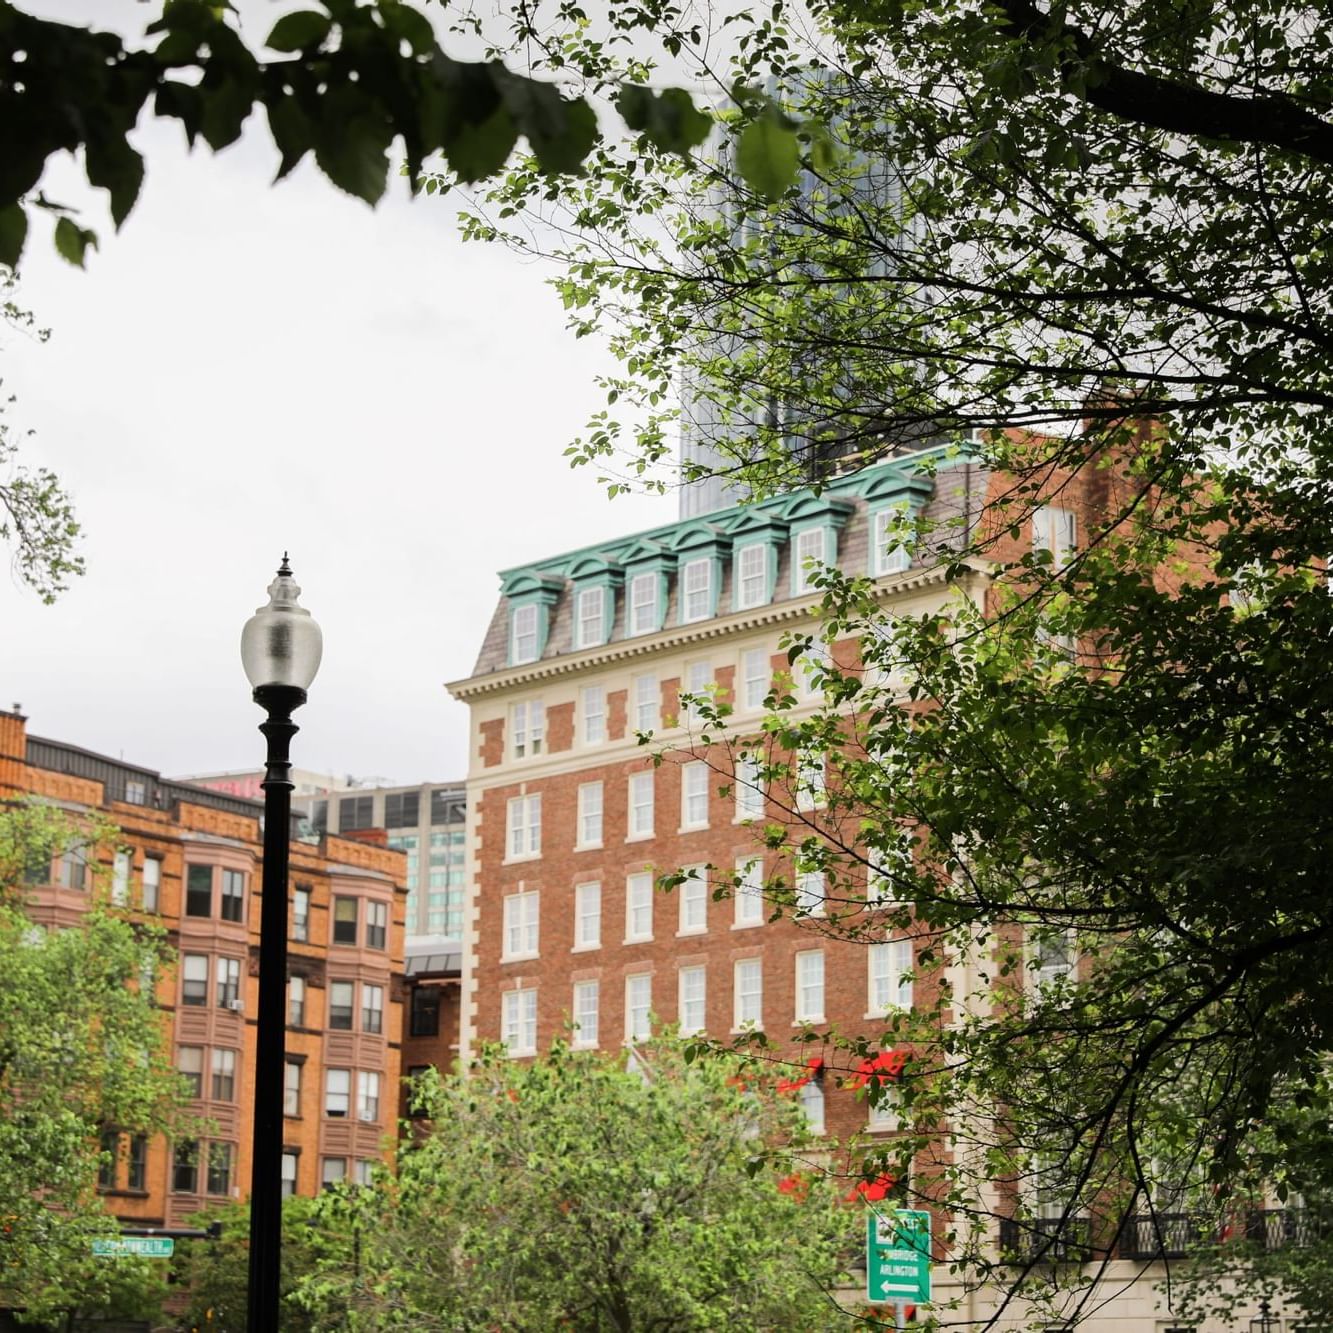 A distant exterior view of The Eliot Hotel through trees